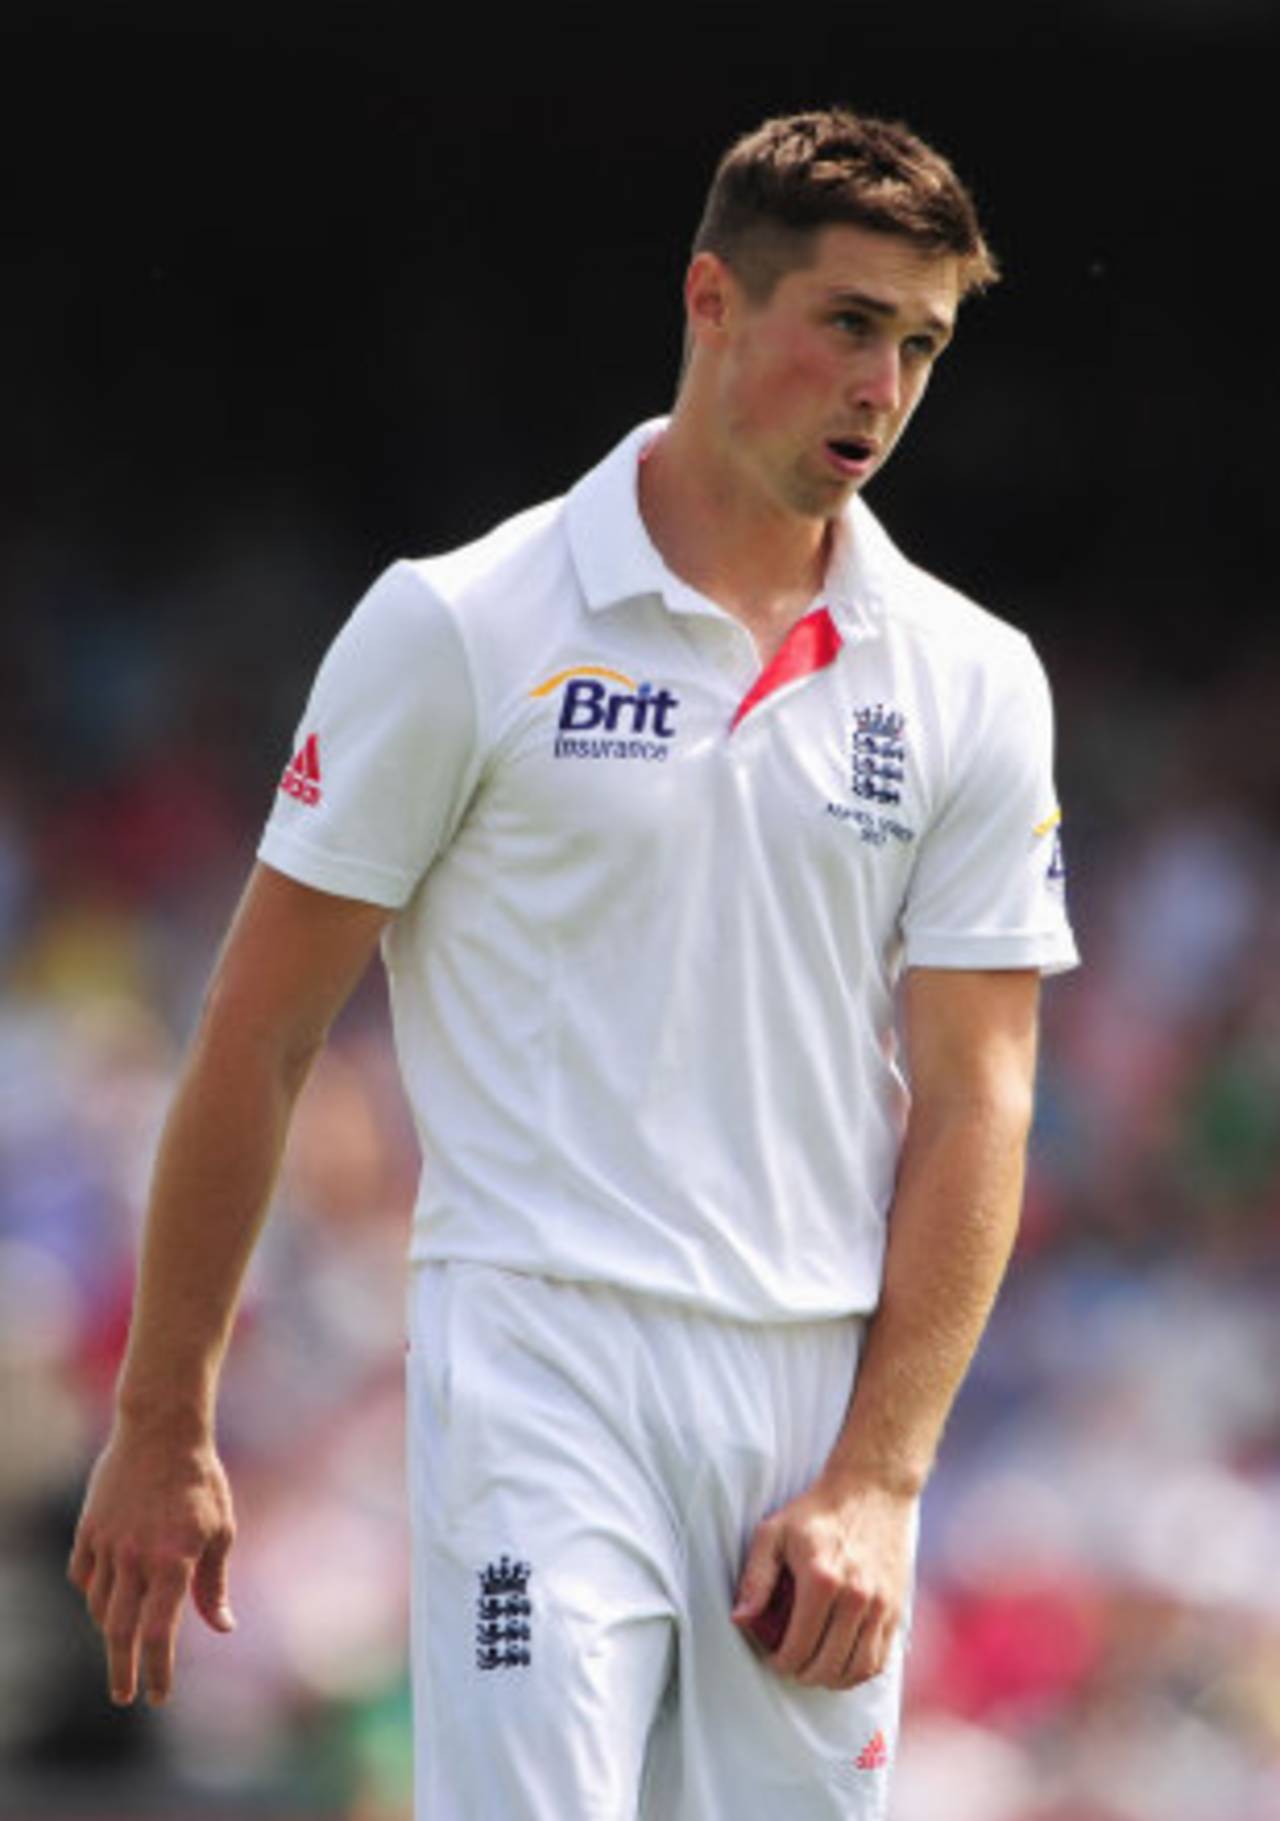 Chris Woakes opening spell didn't run smoothly, England v Australia, 5th Investec Test, The Oval, 1st day, August 21, 2013